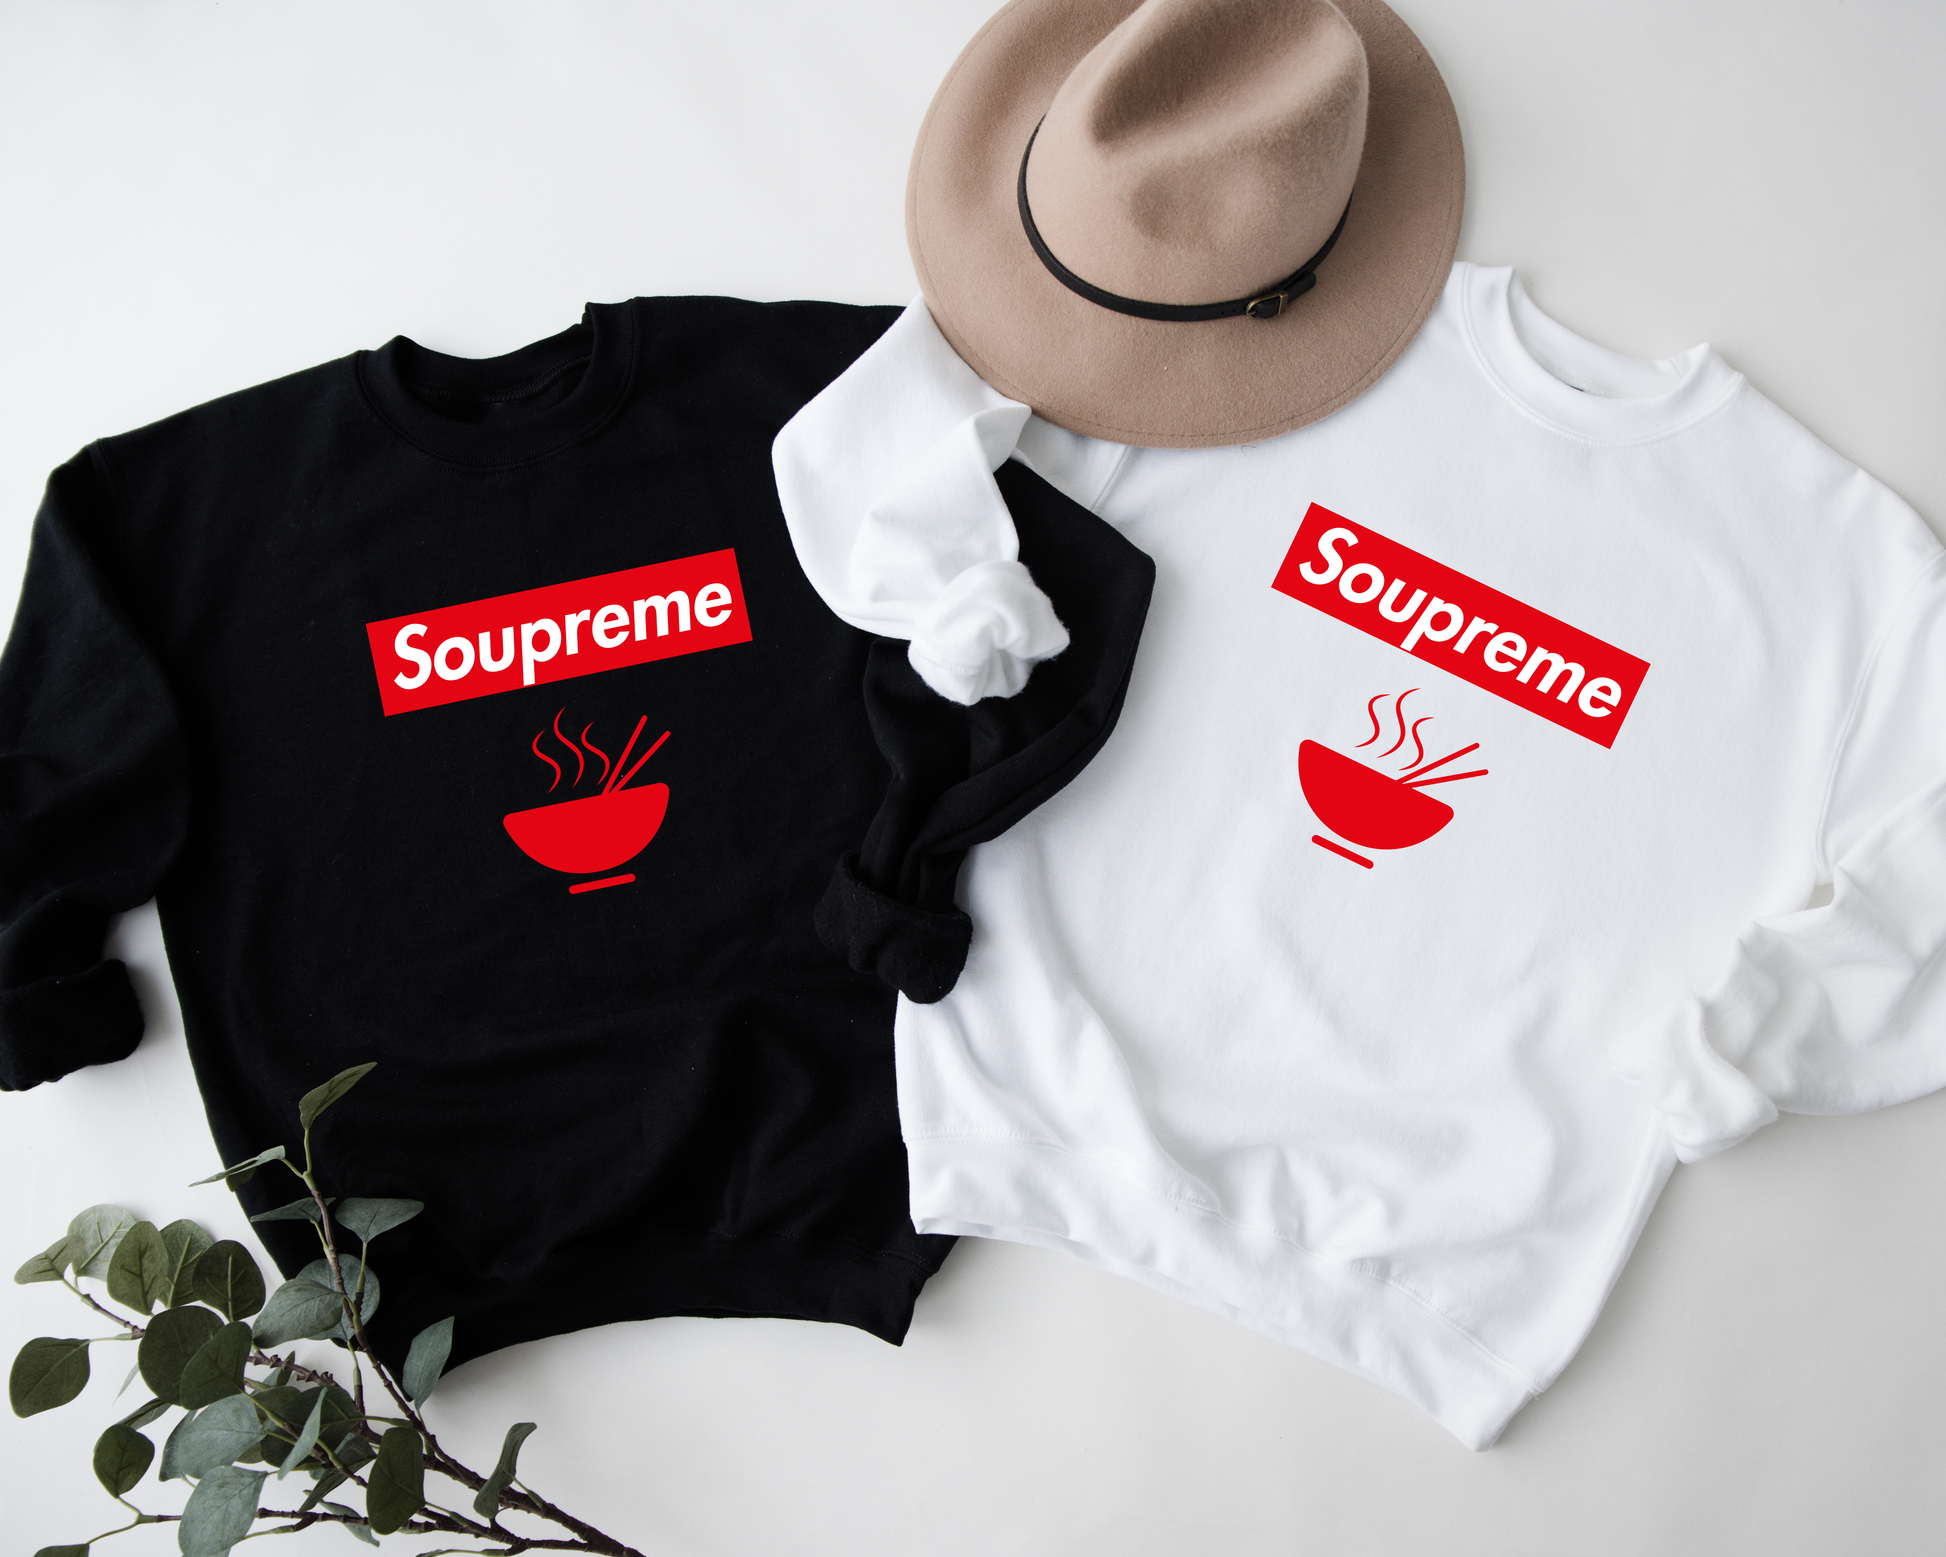 Express your love for ramen and fashion with this tongue-in-cheek "Soupreme" noodle lover t-shirt.